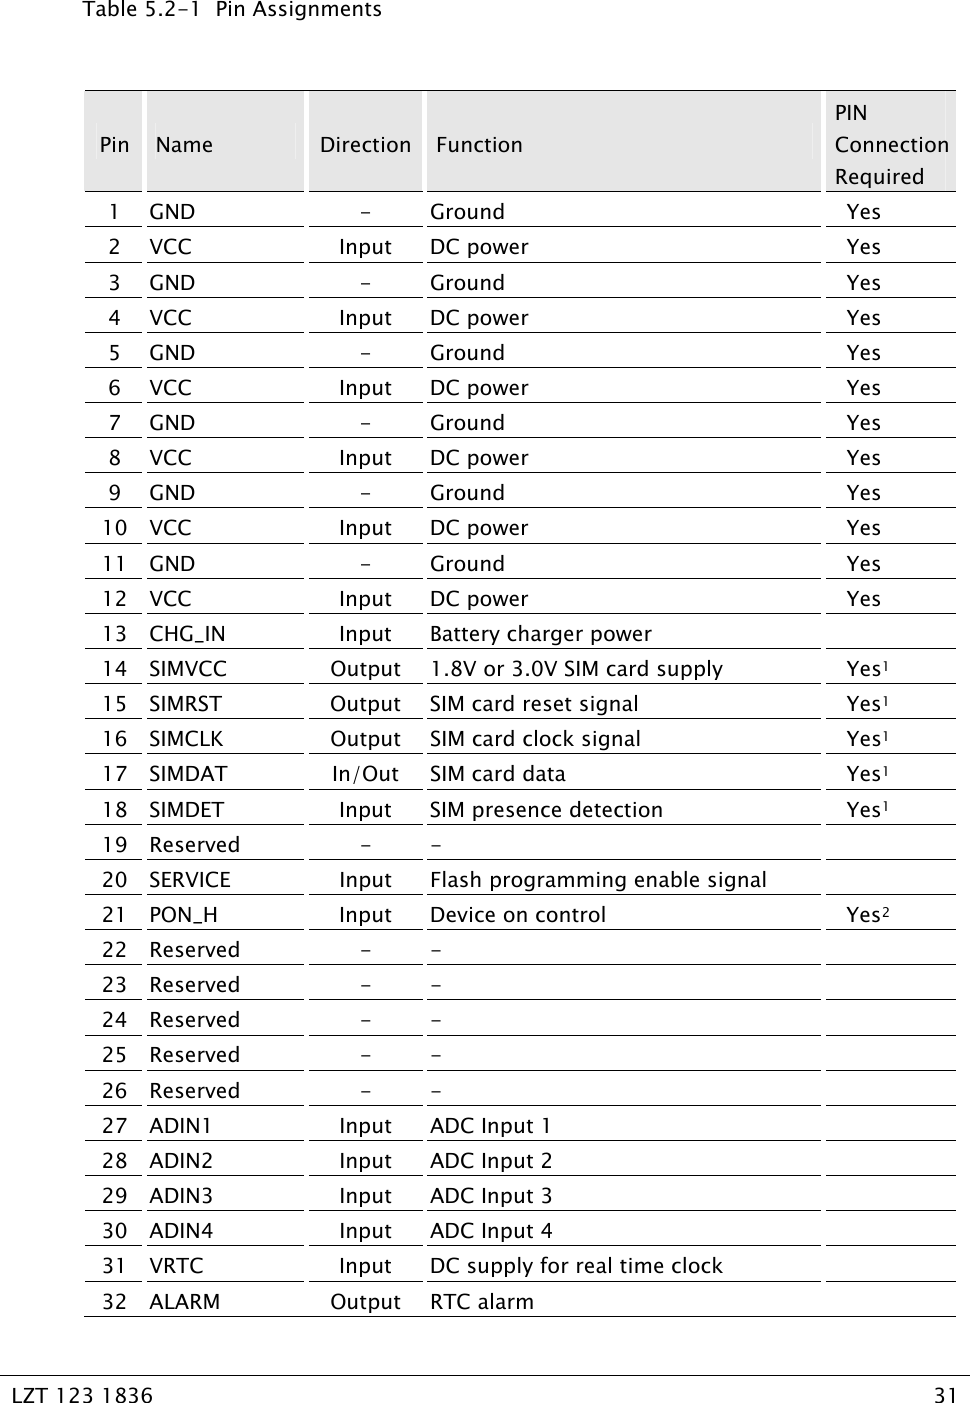   LZT 123 1836  31   Table 5.2-1  Pin Assignments  Pin  Name  Direction Function PIN Connection Required 1 GND  -  Ground  Yes 2 VCC  Input  DC power  Yes 3 GND  -  Ground  Yes 4 VCC  Input  DC power  Yes 5 GND  -  Ground  Yes 6 VCC  Input  DC power  Yes 7 GND  -  Ground  Yes 8 VCC  Input  DC power  Yes 9 GND  -  Ground  Yes 10 VCC  Input  DC power  Yes 11 GND  -  Ground  Yes 12 VCC  Input  DC power  Yes 13  CHG_IN  Input  Battery charger power   14  SIMVCC  Output  1.8V or 3.0V SIM card supply  Yes1 15  SIMRST  Output  SIM card reset signal  Yes1 16  SIMCLK  Output  SIM card clock signal  Yes1 17 SIMDAT  In/Out  SIM card data  Yes1 18  SIMDET  Input  SIM presence detection  Yes1 19 Reserved  -  -   20  SERVICE  Input  Flash programming enable signal   21  PON_H  Input  Device on control  Yes2 22 Reserved  -  -   23 Reserved  -  -   24 Reserved  -  -   25 Reserved  -  -   26 Reserved  -  -   27 ADIN1  Input  ADC Input 1   28 ADIN2  Input  ADC Input 2   29 ADIN3  Input  ADC Input 3   30 ADIN4  Input  ADC Input 4   31  VRTC  Input  DC supply for real time clock   32  ALARM  Output  RTC alarm    